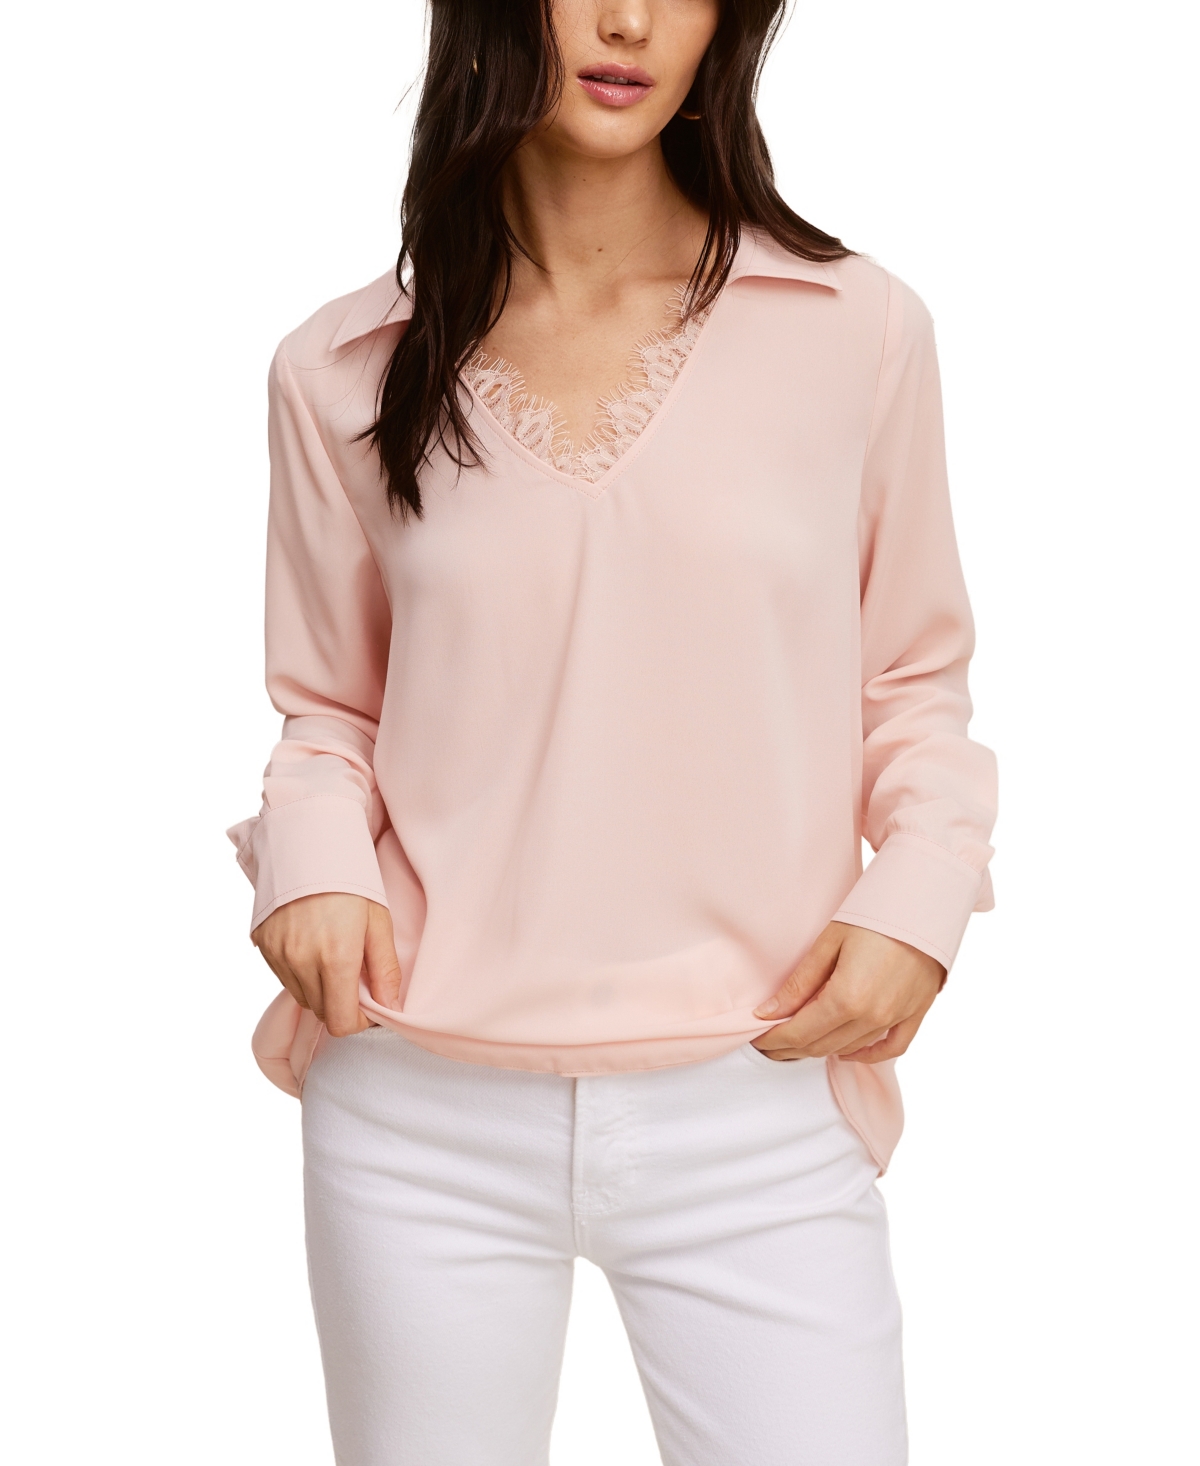 Solid Soft Crepe Top W/ Collar Lace - EVENING SAND